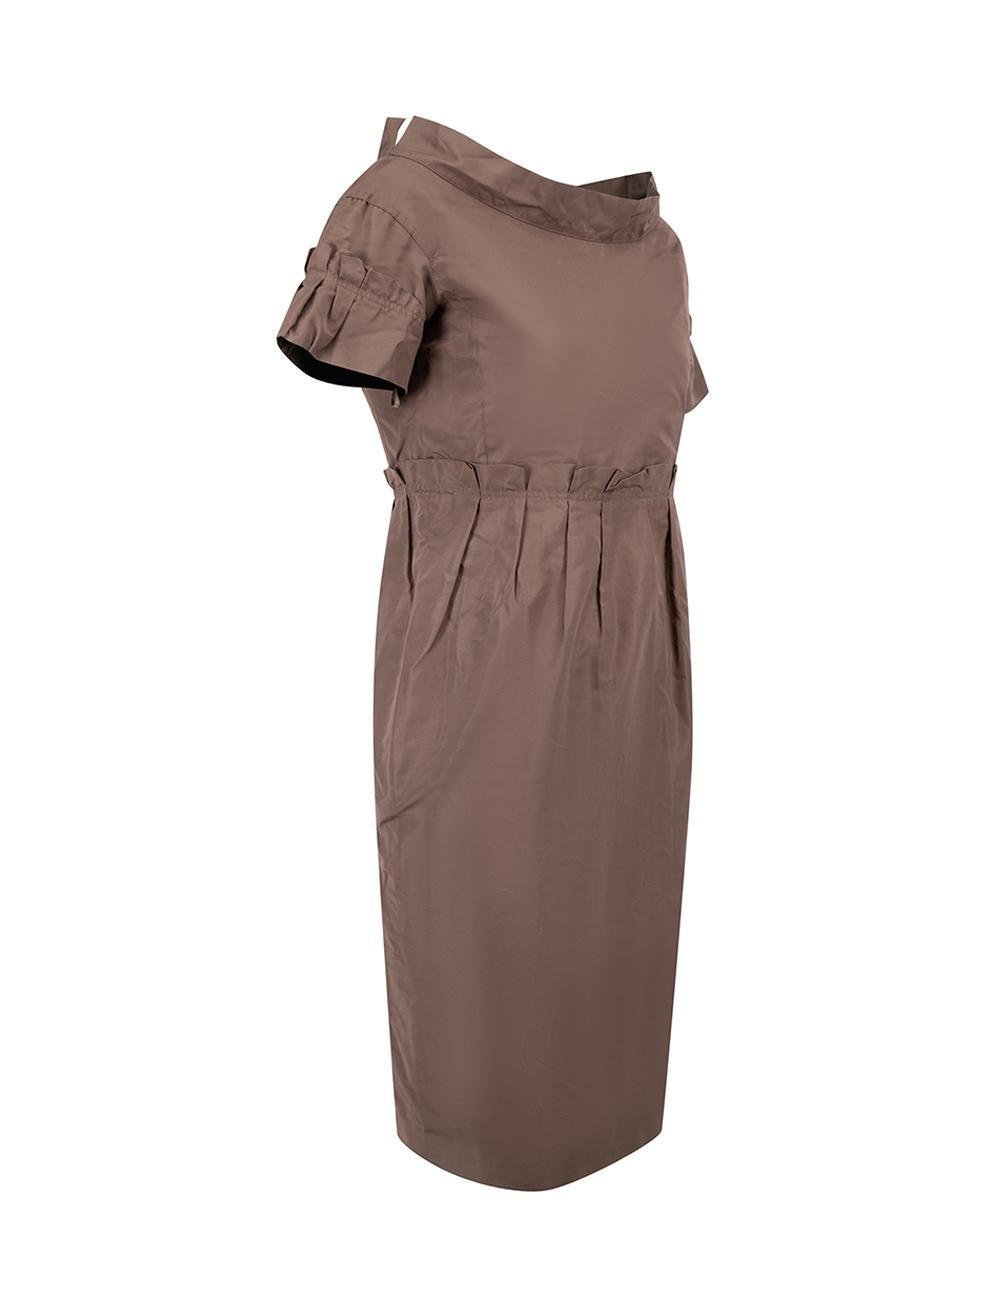 CONDITION is Very good. Hardly any visible wear to dress is evident on this used Burberry Prorsum designer resale item.



Details


Brown

Silk

Off-the-shoulder dress

Midi length

Short sleeved

Ruffled skirt and sleeves

Back zip